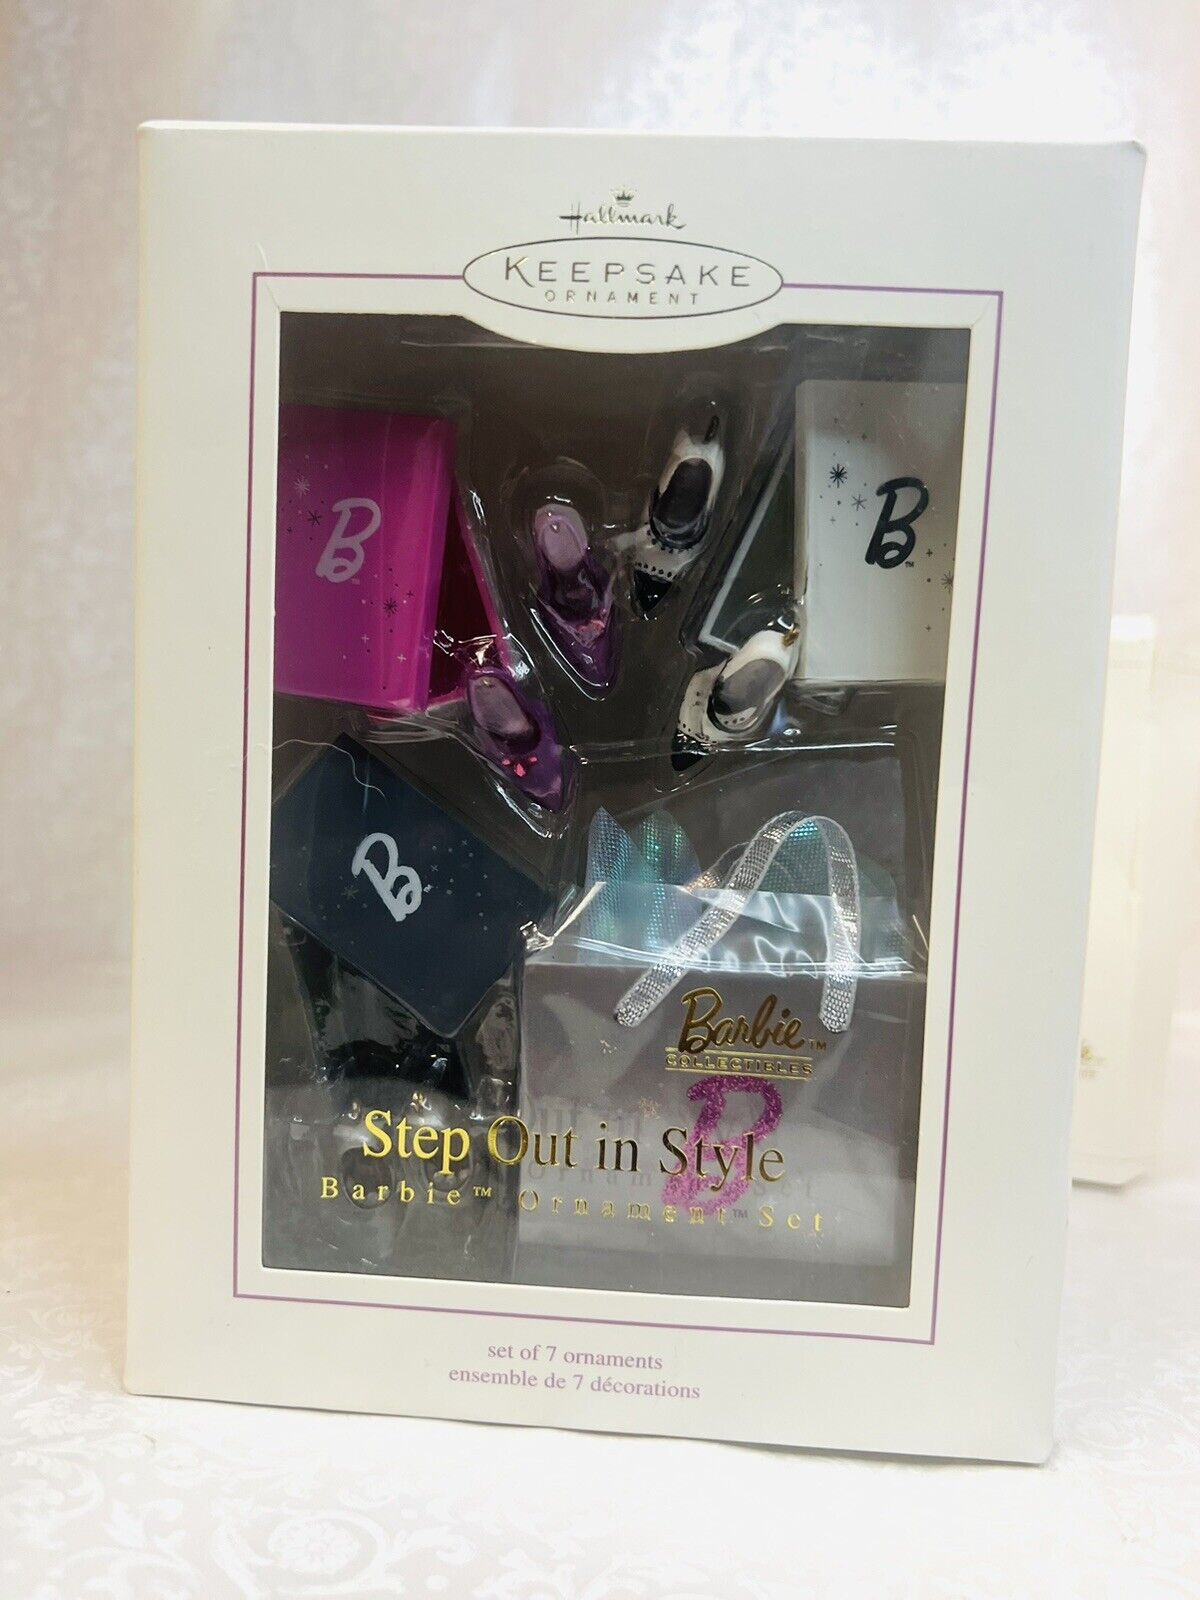 2005 Hallmark Keepsake Barbie “Step Out In Style” Ornaments. Set Of 7